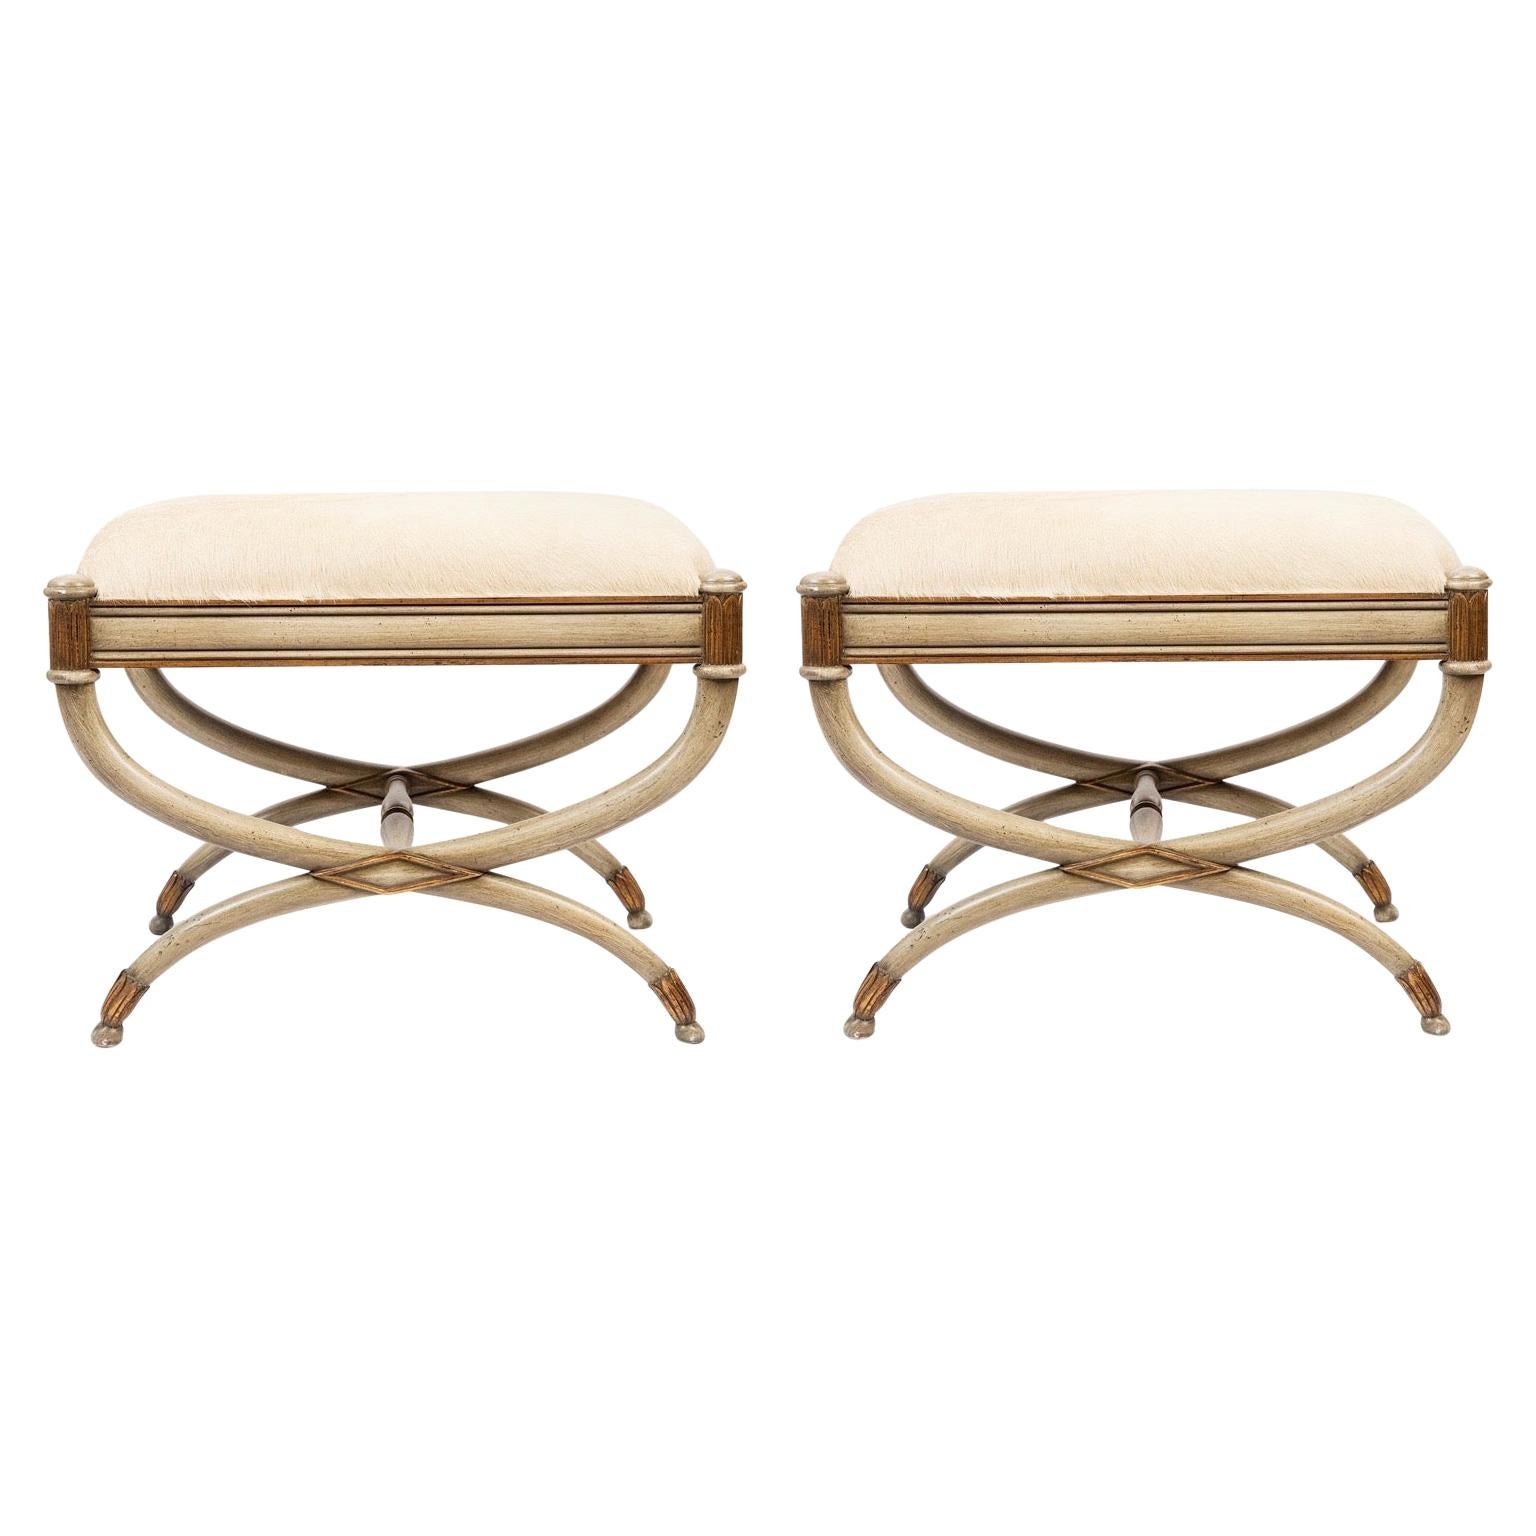 Pair of Neoclassical Painted Benches